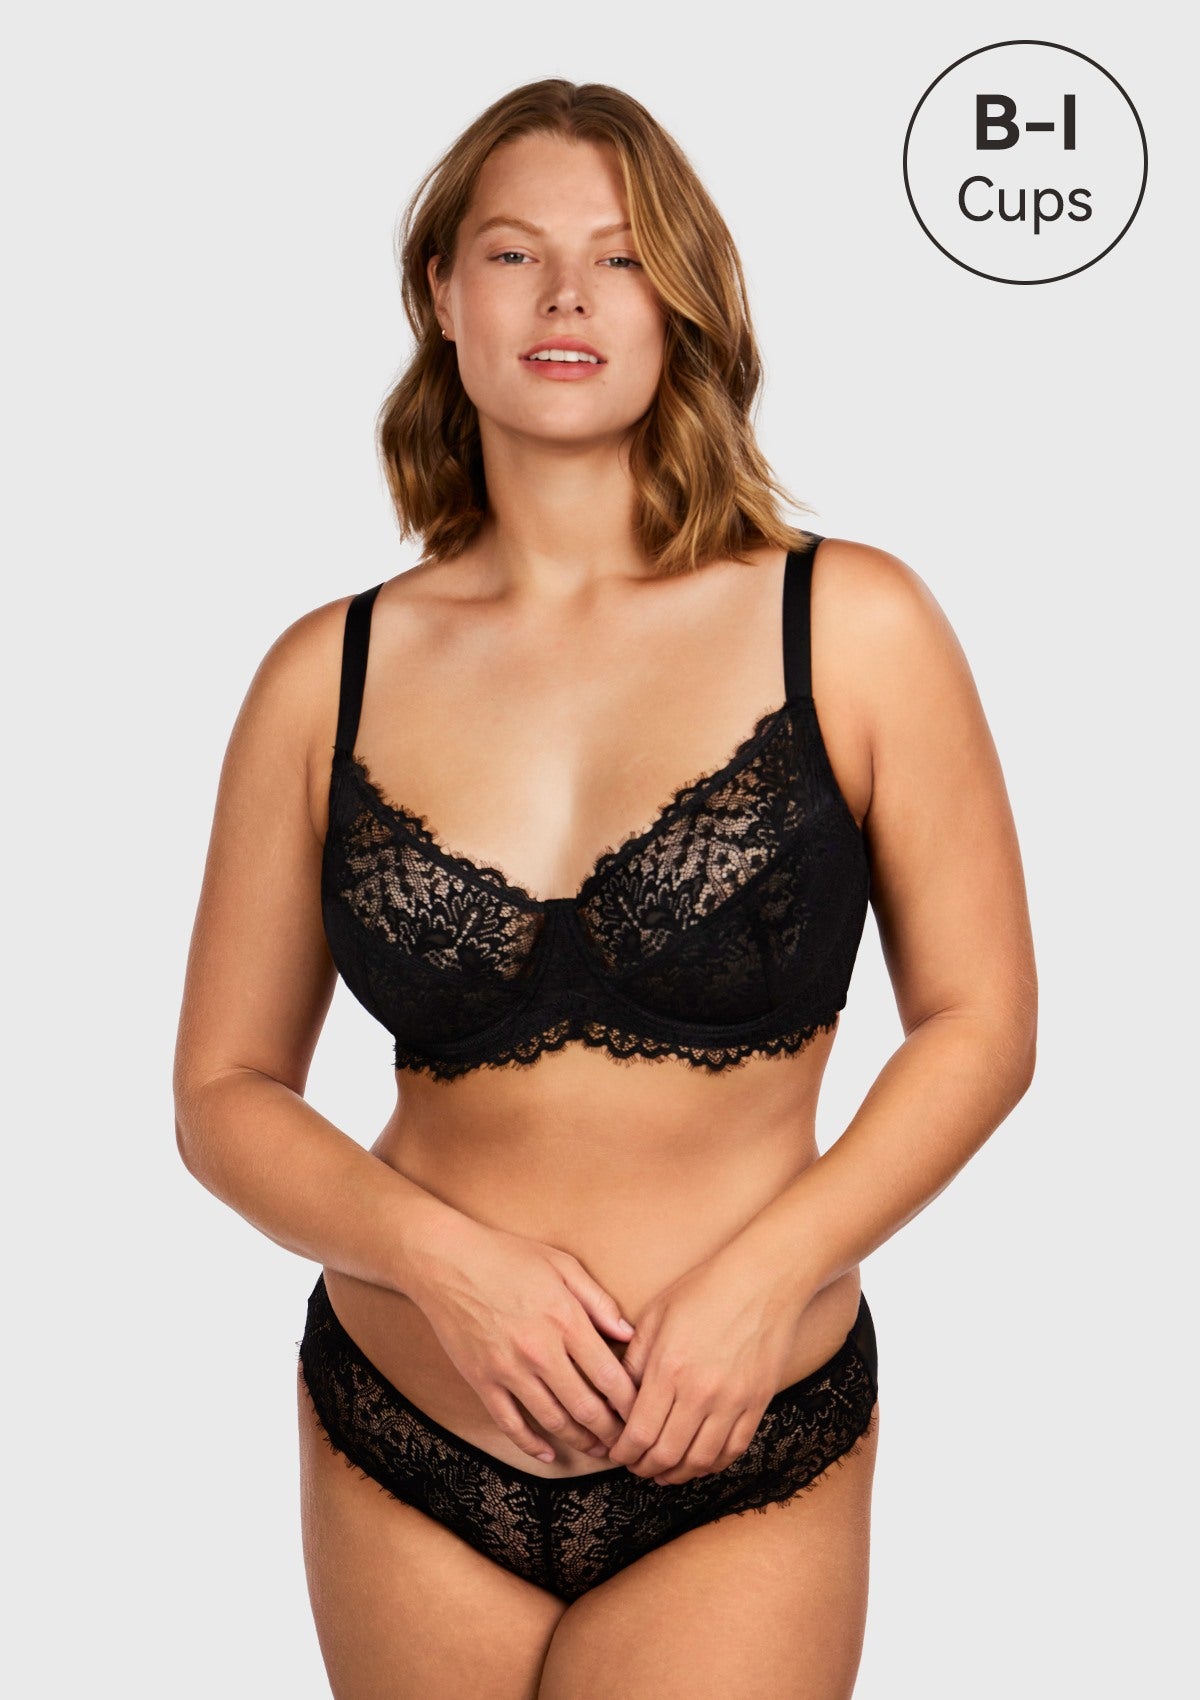 HSIA Sunflower Underwire Lace Bra: Unlined Full Coverage Support Bra - Black / 46 / D